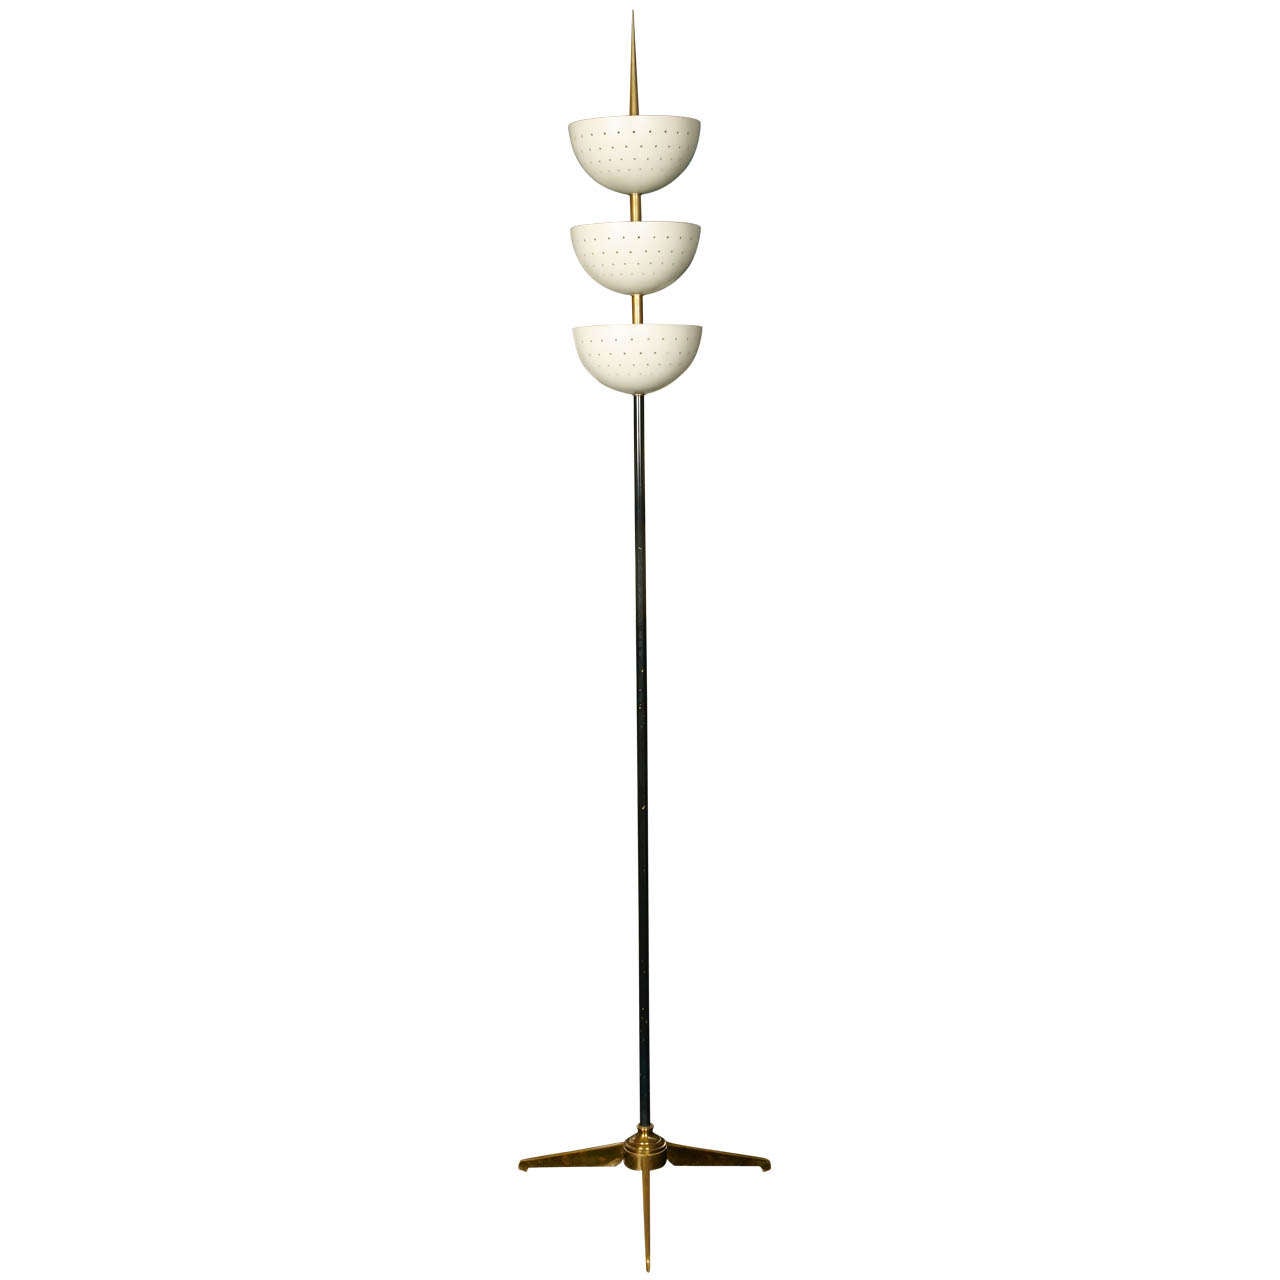 Very Rare and Exquisite Sculptural Floor Lamp by Angelo Lelli